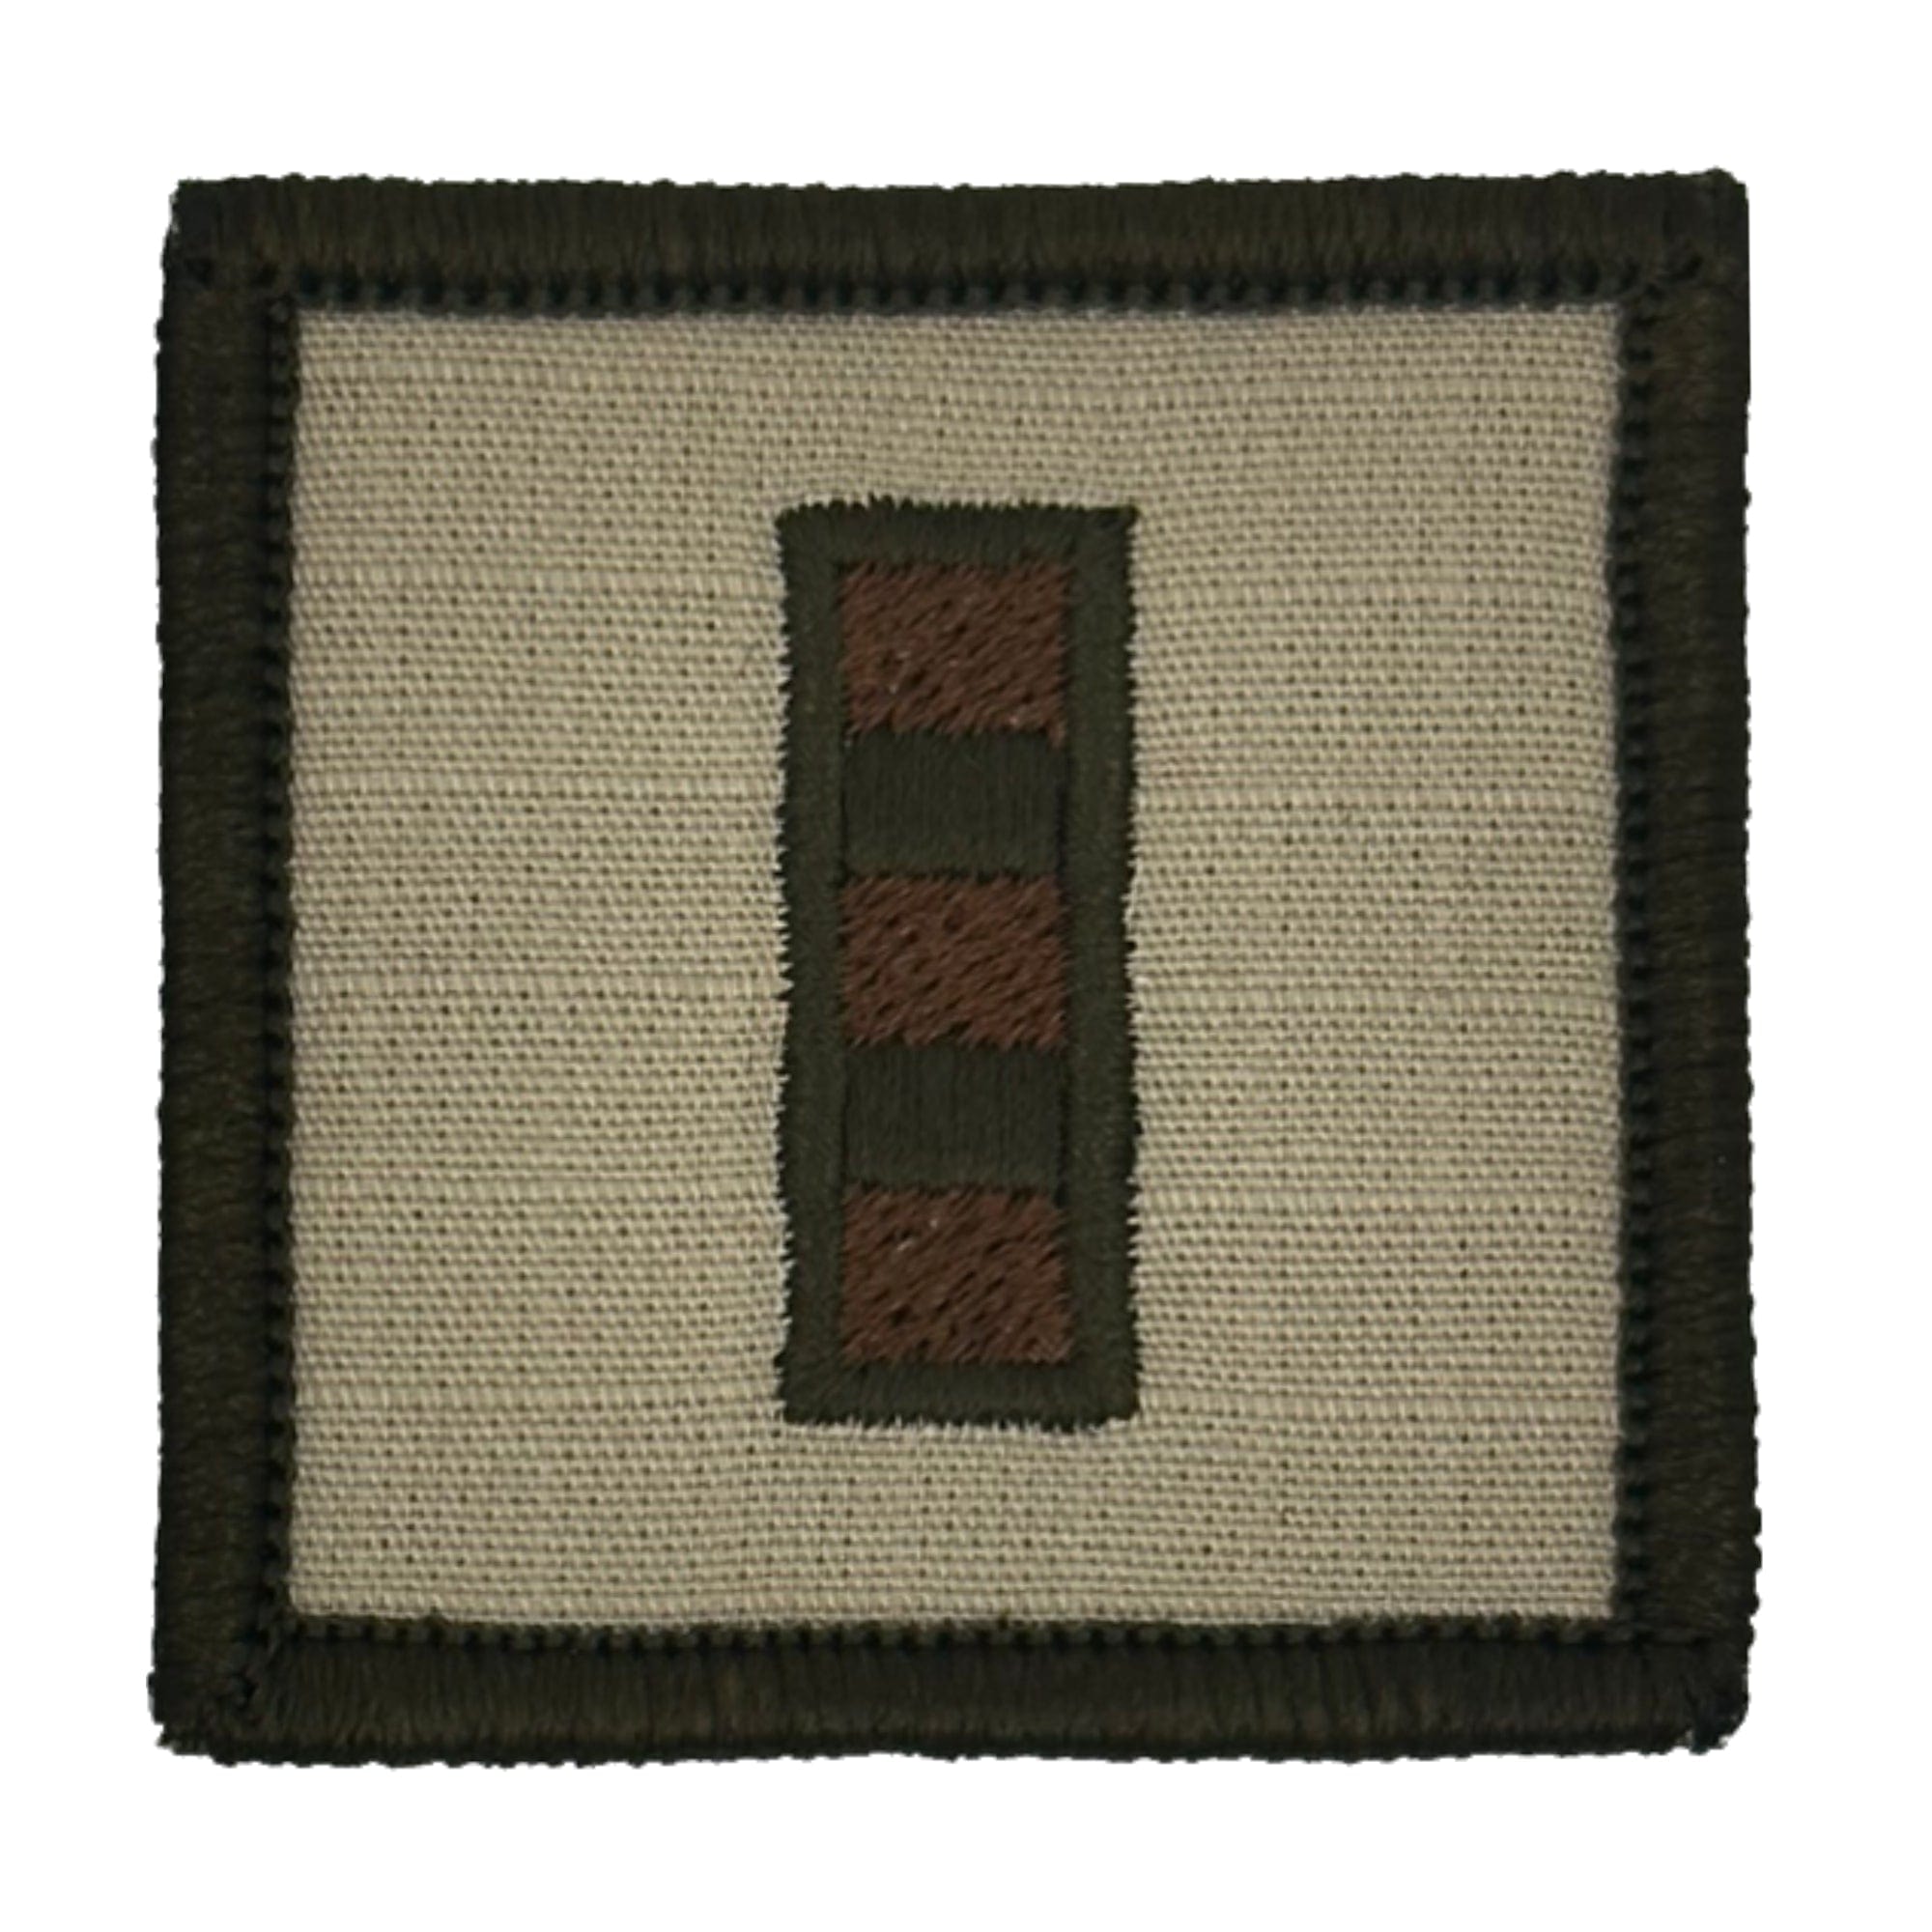 Tactical Gear Junkie Patches Desert Sand / Chief Warrant Officer 4 USMC Rank Insignia - 2x2 Patch